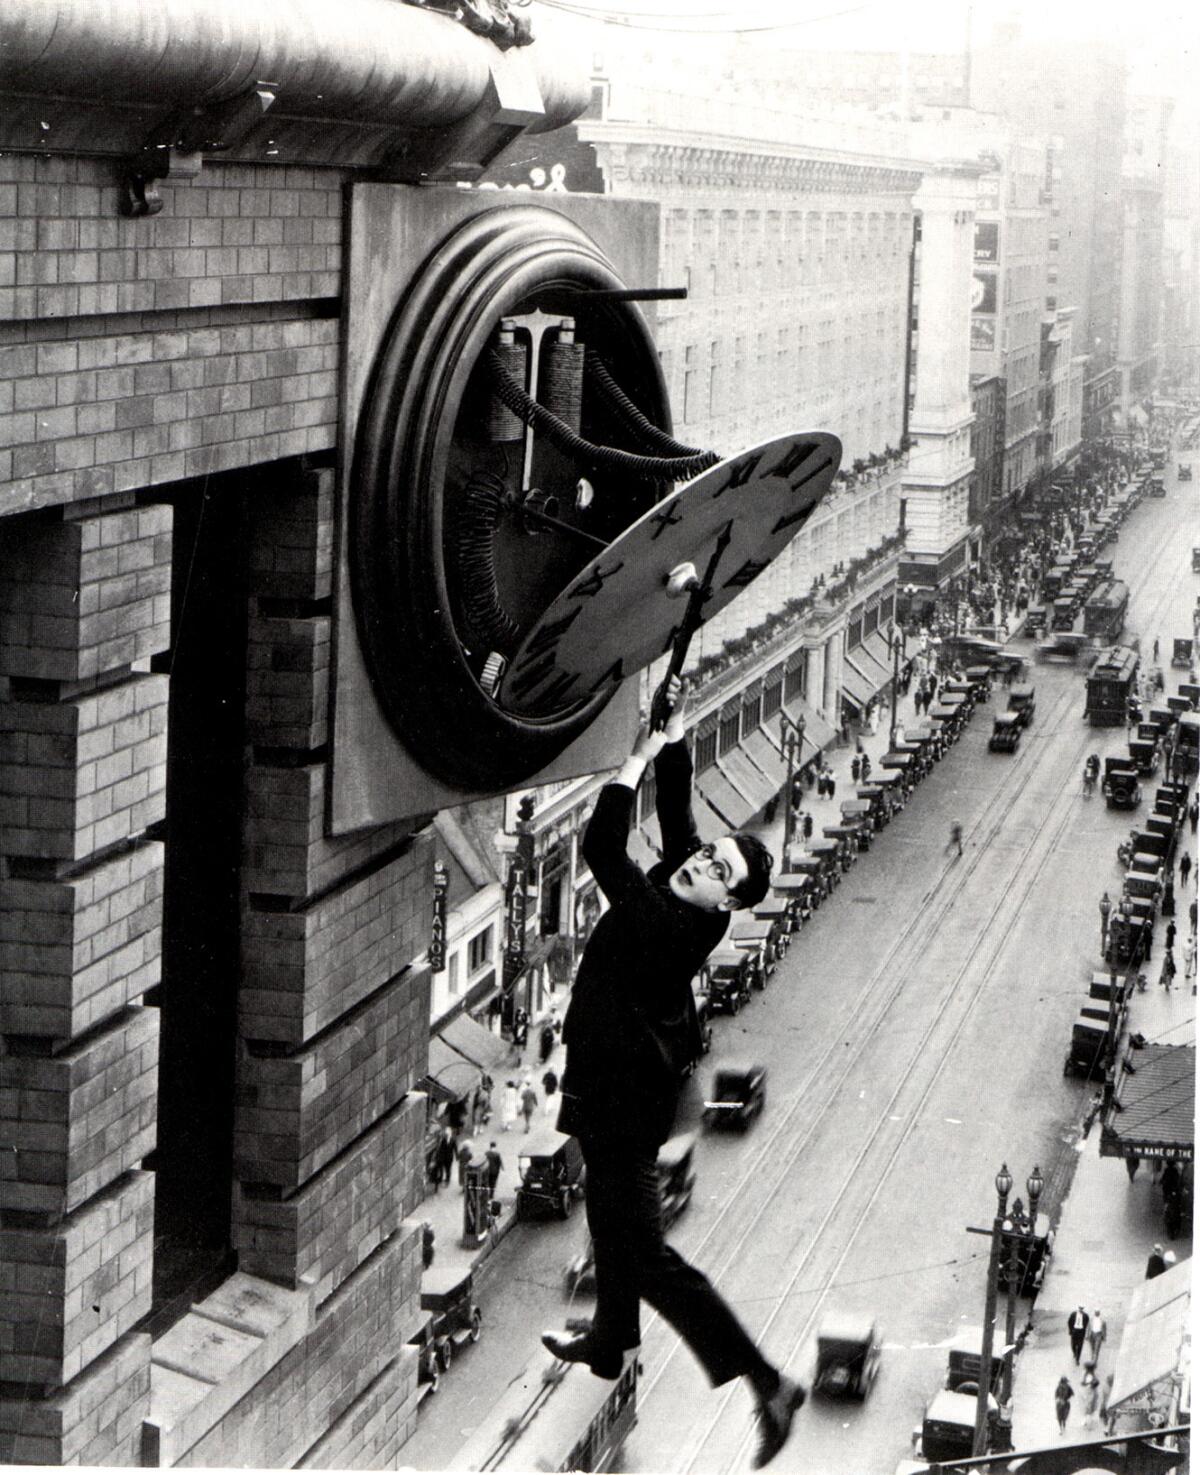 A man dangles from a clock face on the side of a building high above downtown L.A.